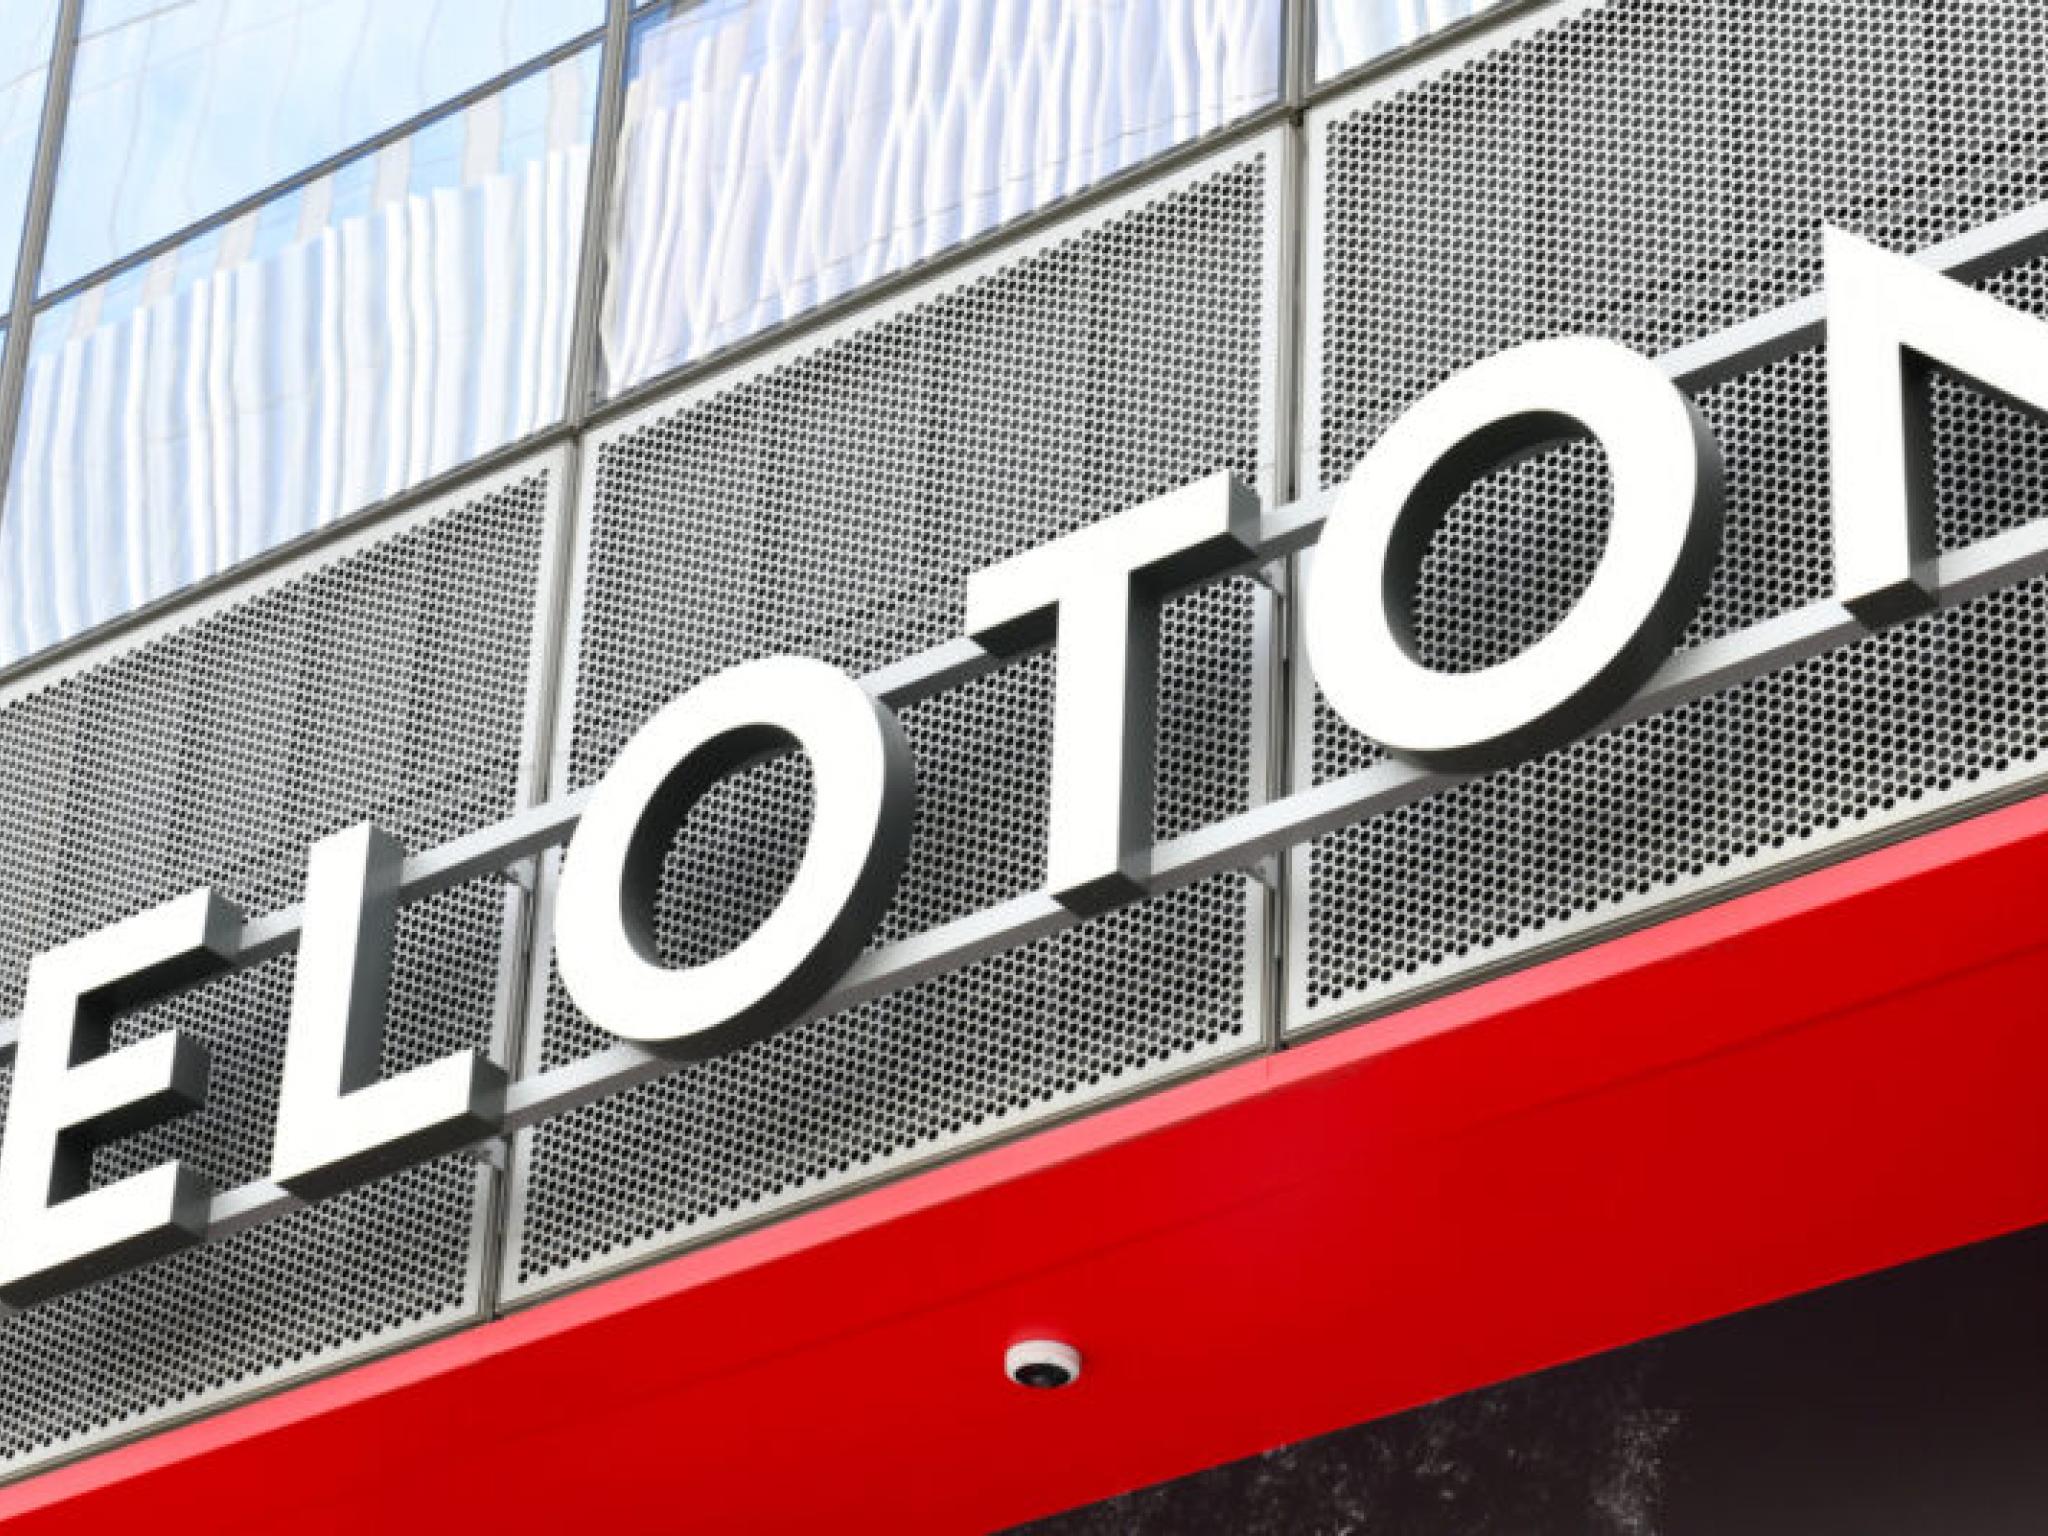  peloton-ceo-barry-mccarthy-resigns-as-company-decides-to-downsize-by-15-no-other-way-to-bring-its-spending-in-line-with-its-revenue 